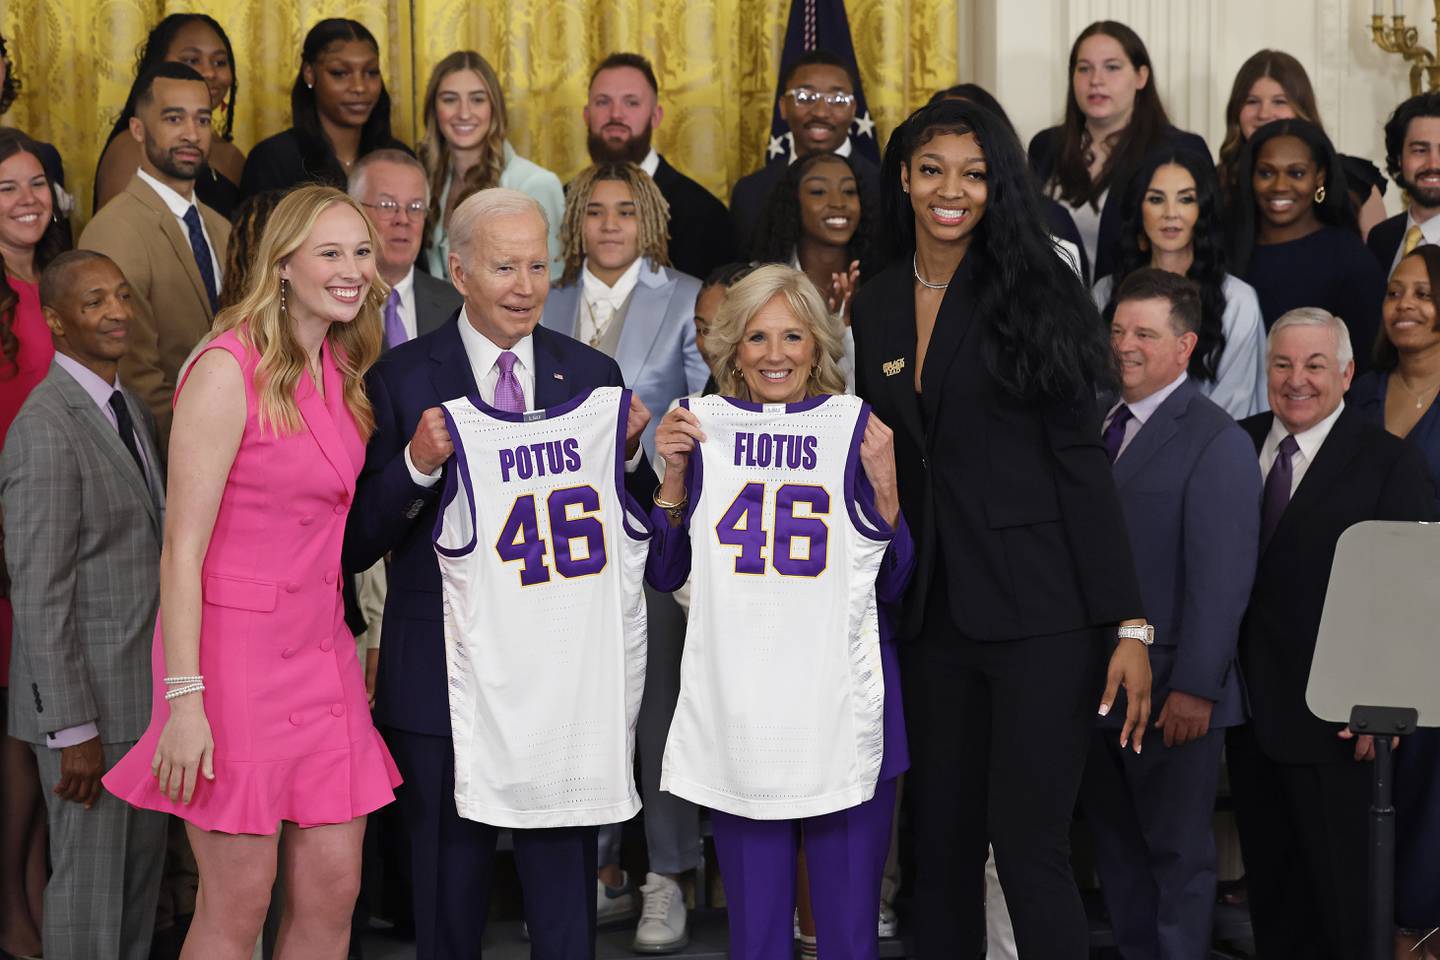 WASHINGTON, DC - MAY 26: U.S. President Joe Biden and first lady Jill Biden pose for photographs with co-captains Emily Ward (L) and Angel Reese during a celebration for the Louisiana State University NCAA Division I women's basketball national championship team in the East Room of the White House on May 26, 2023 in Washington, DC. Under the leadership of head coach Kim Mulkey, the LSU Tigers defeated Iowa 102-85 to win their first national championship.